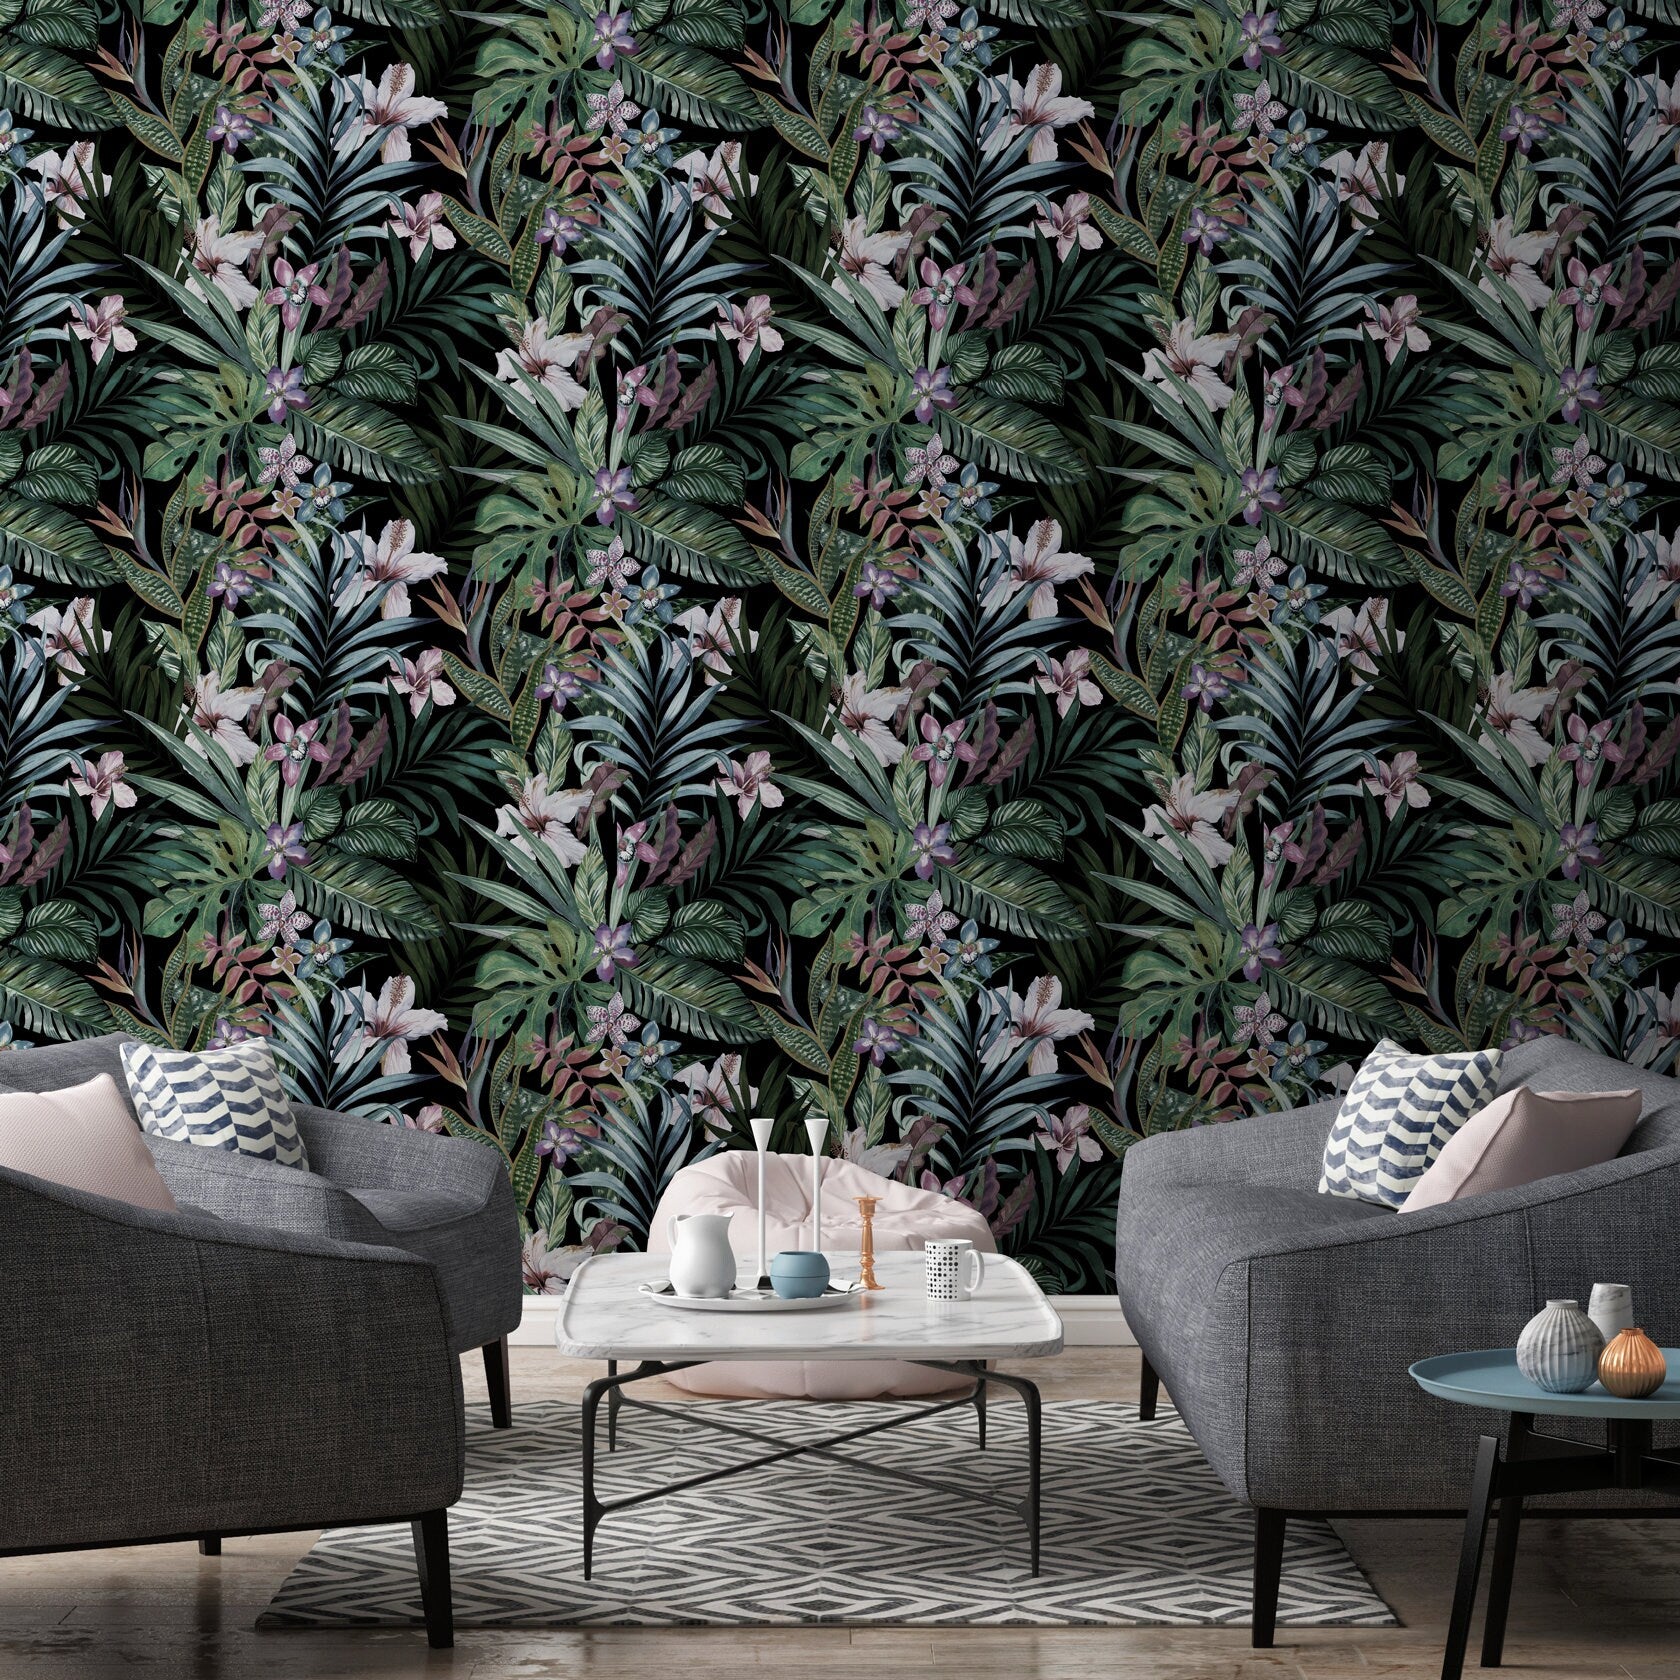 Removable Wallpaper Floral Wall Temporary Wallpaper Nursery Wallpaper Wall Decor Wall Paper Removable Peel and Stick Wallpaper - A499